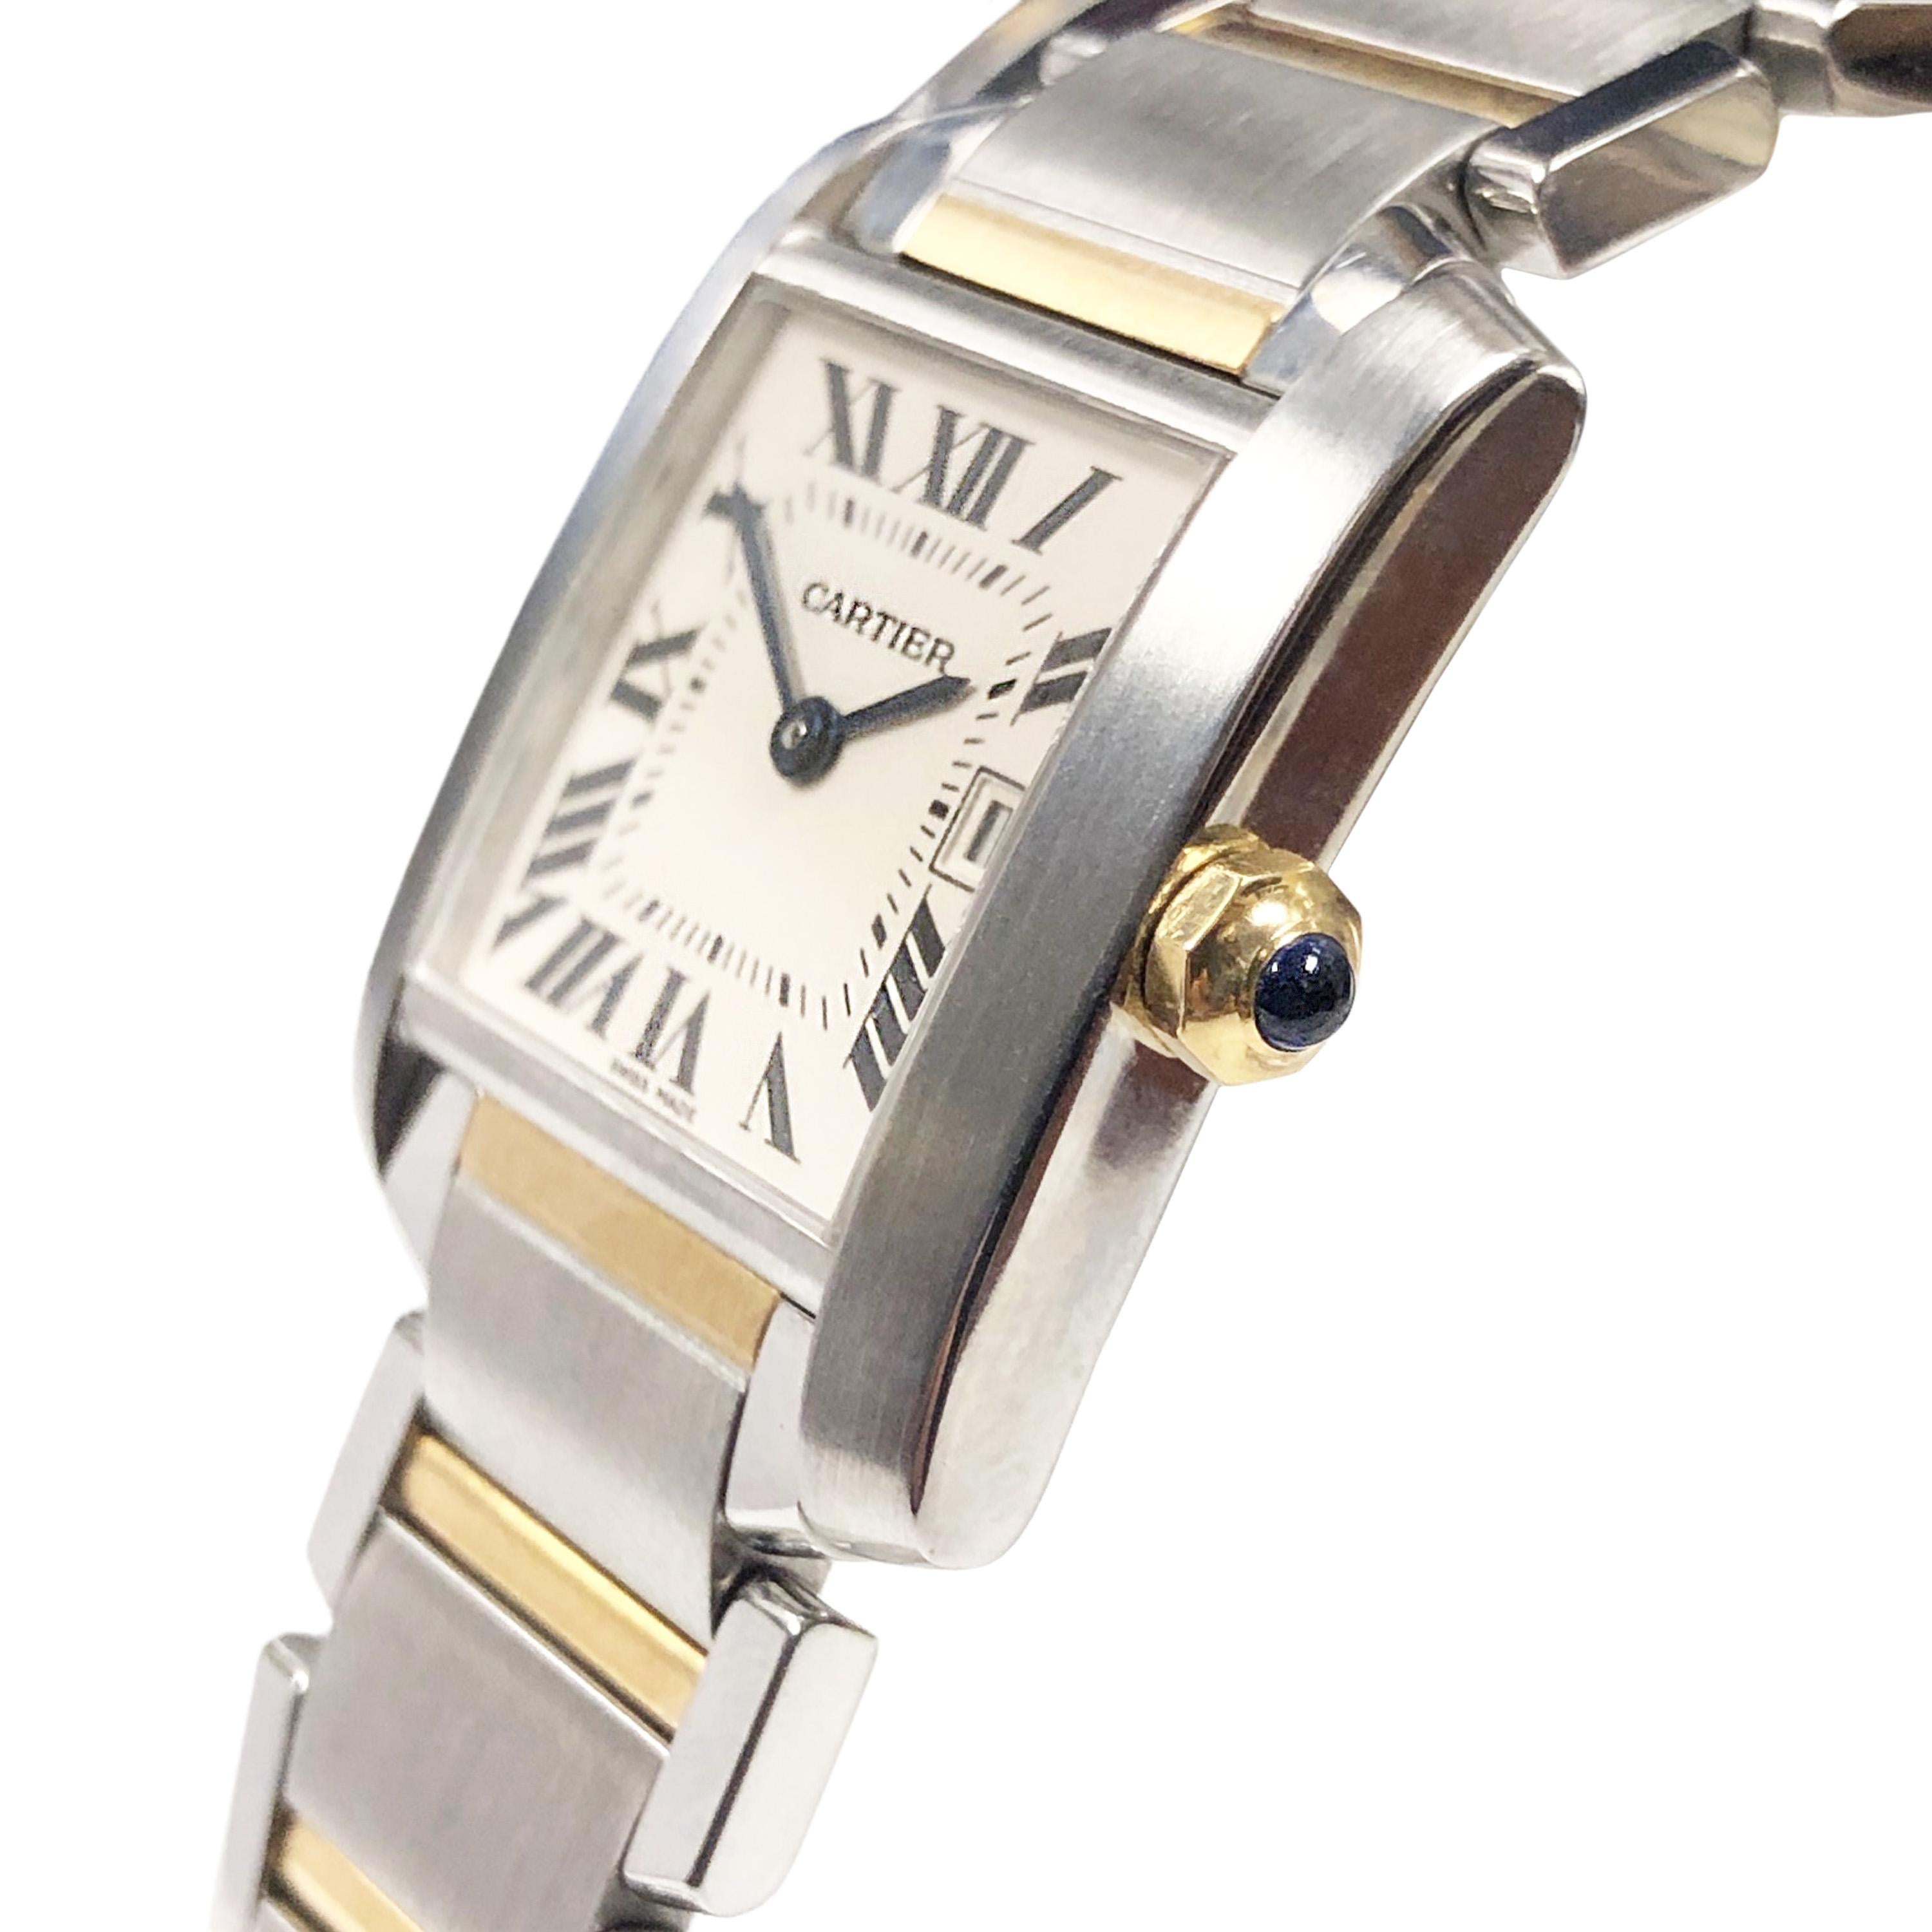 Circa 2014 Cartier Ladies Stainless Steel and 18K Yellow Gold Tank Francaise Wrist Watch, 25 X 20 MM Water Resistant Case, Quartz Movement, Scratch Resistant Crystal, Sapphire Crown, White Dial with Black Roman Numerals and a Calendar window at the